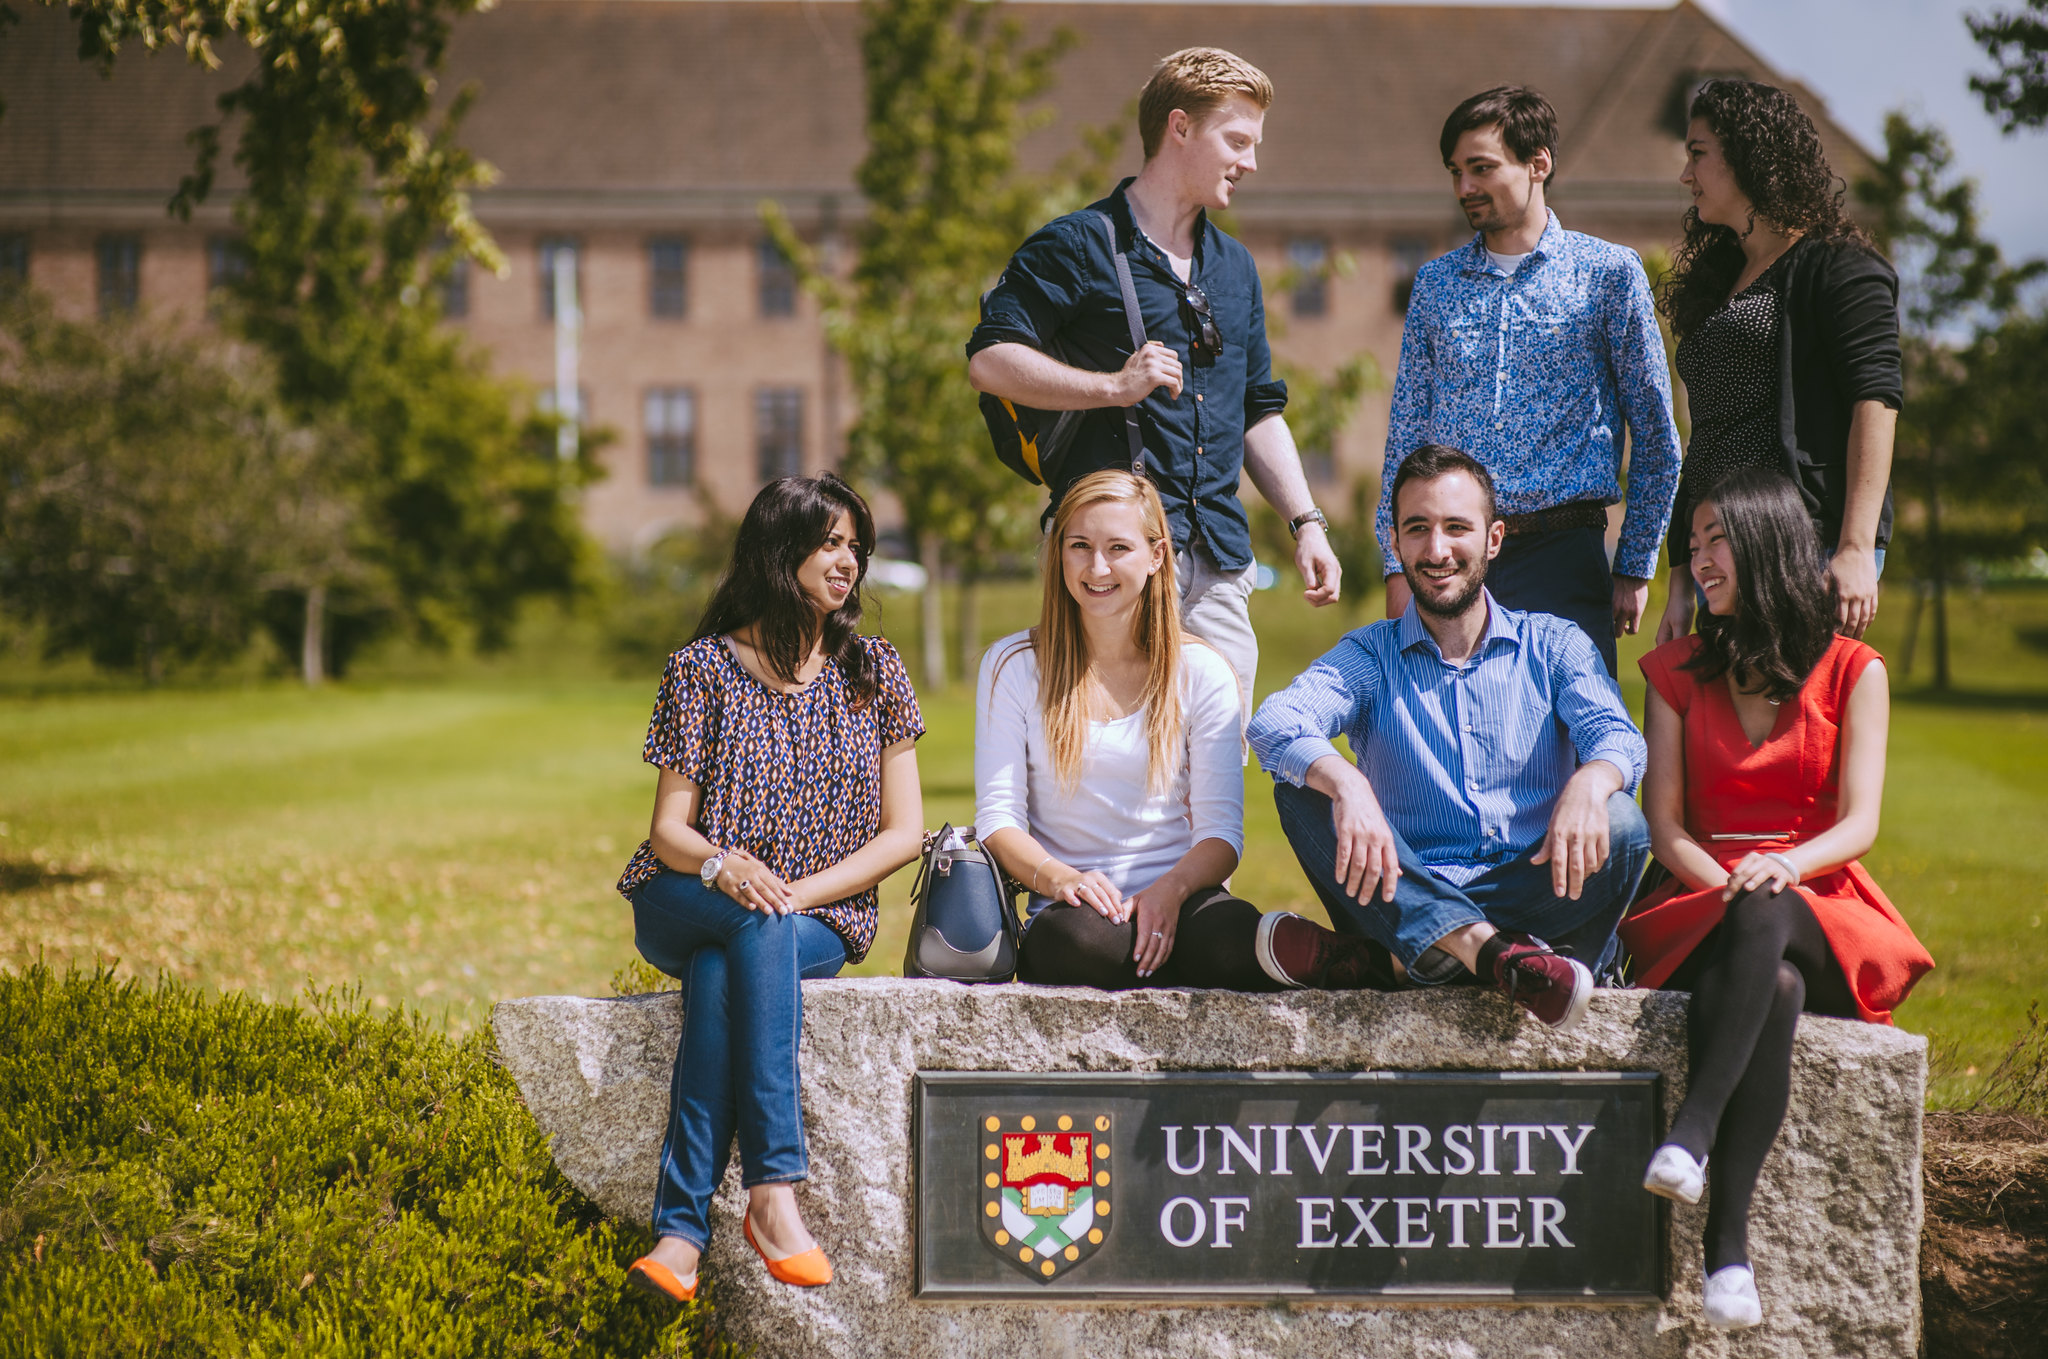 UNIVERSITY OF EXETER Details - Education Abroad